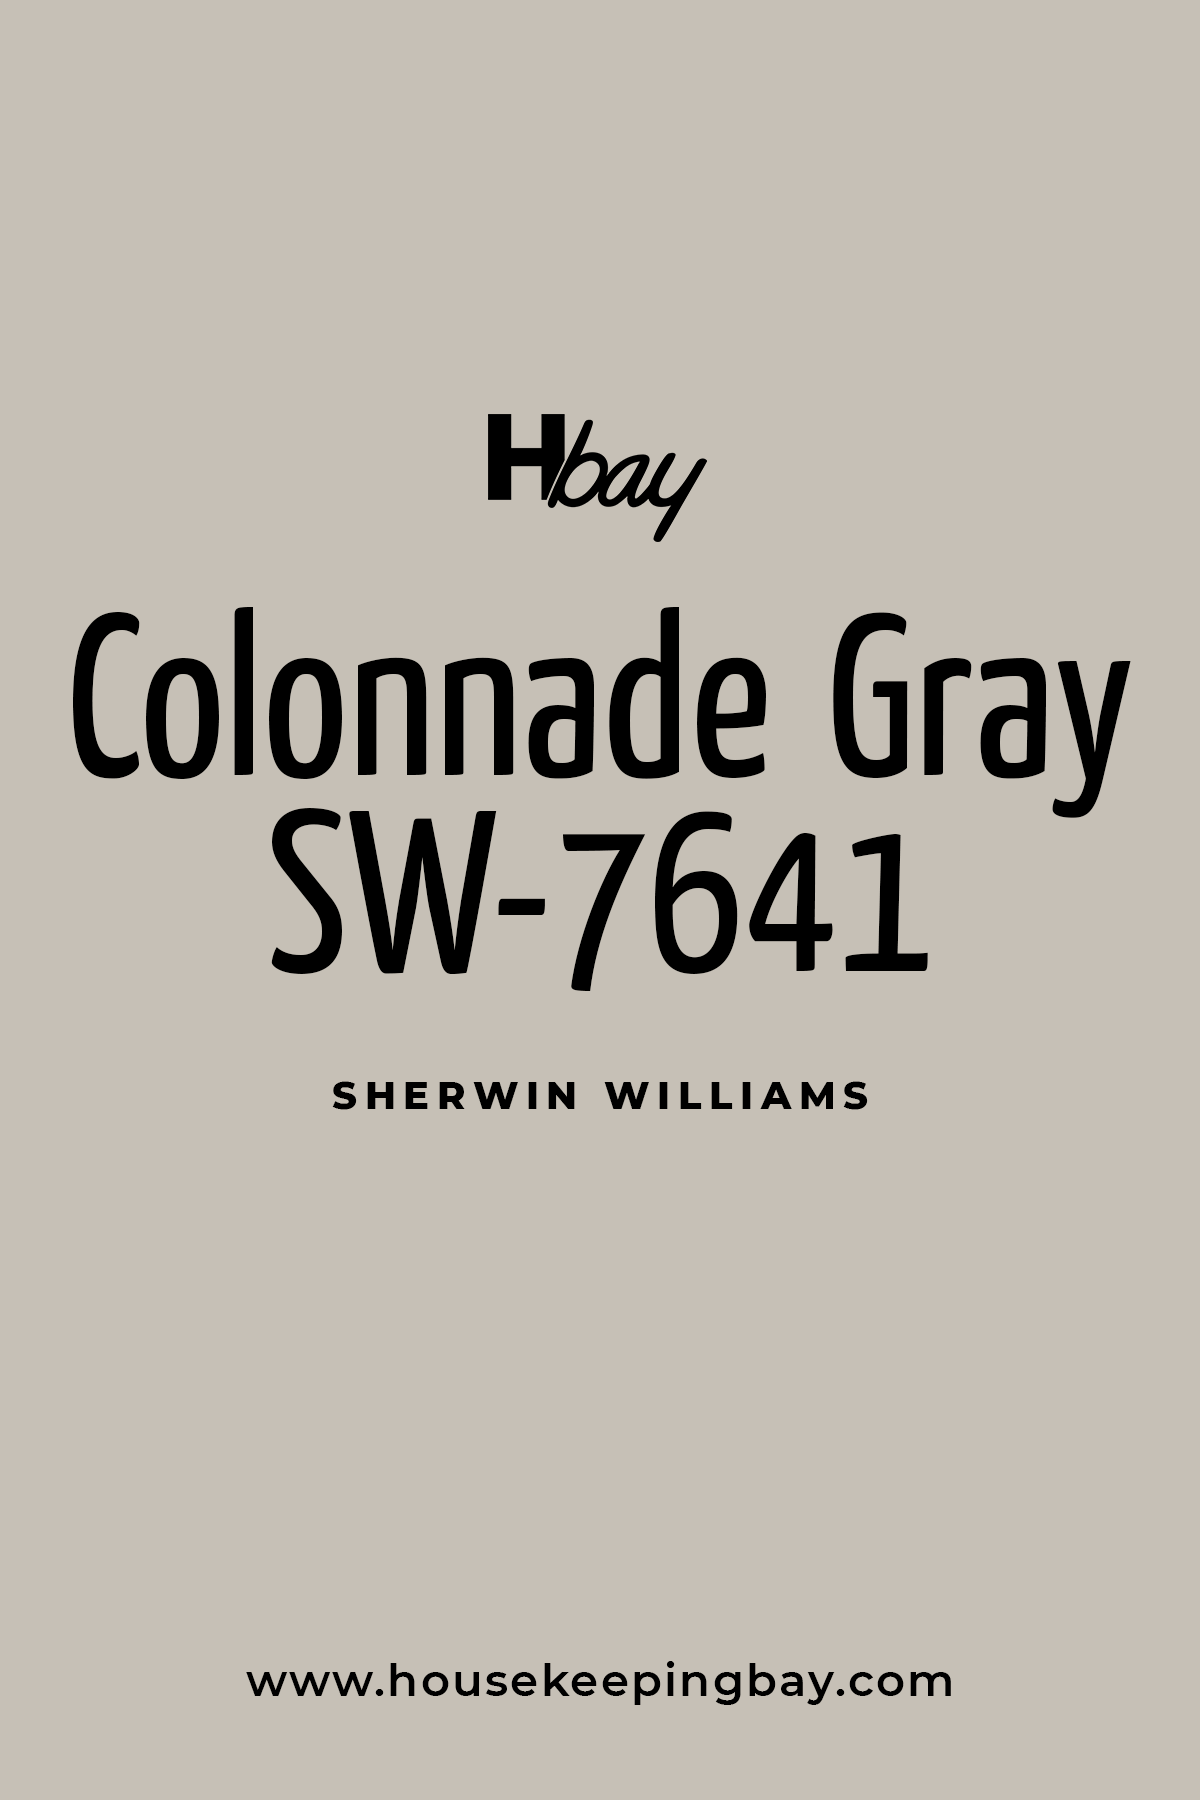 Colonnade Gray SW 7641 By Sherwin Williams (1)